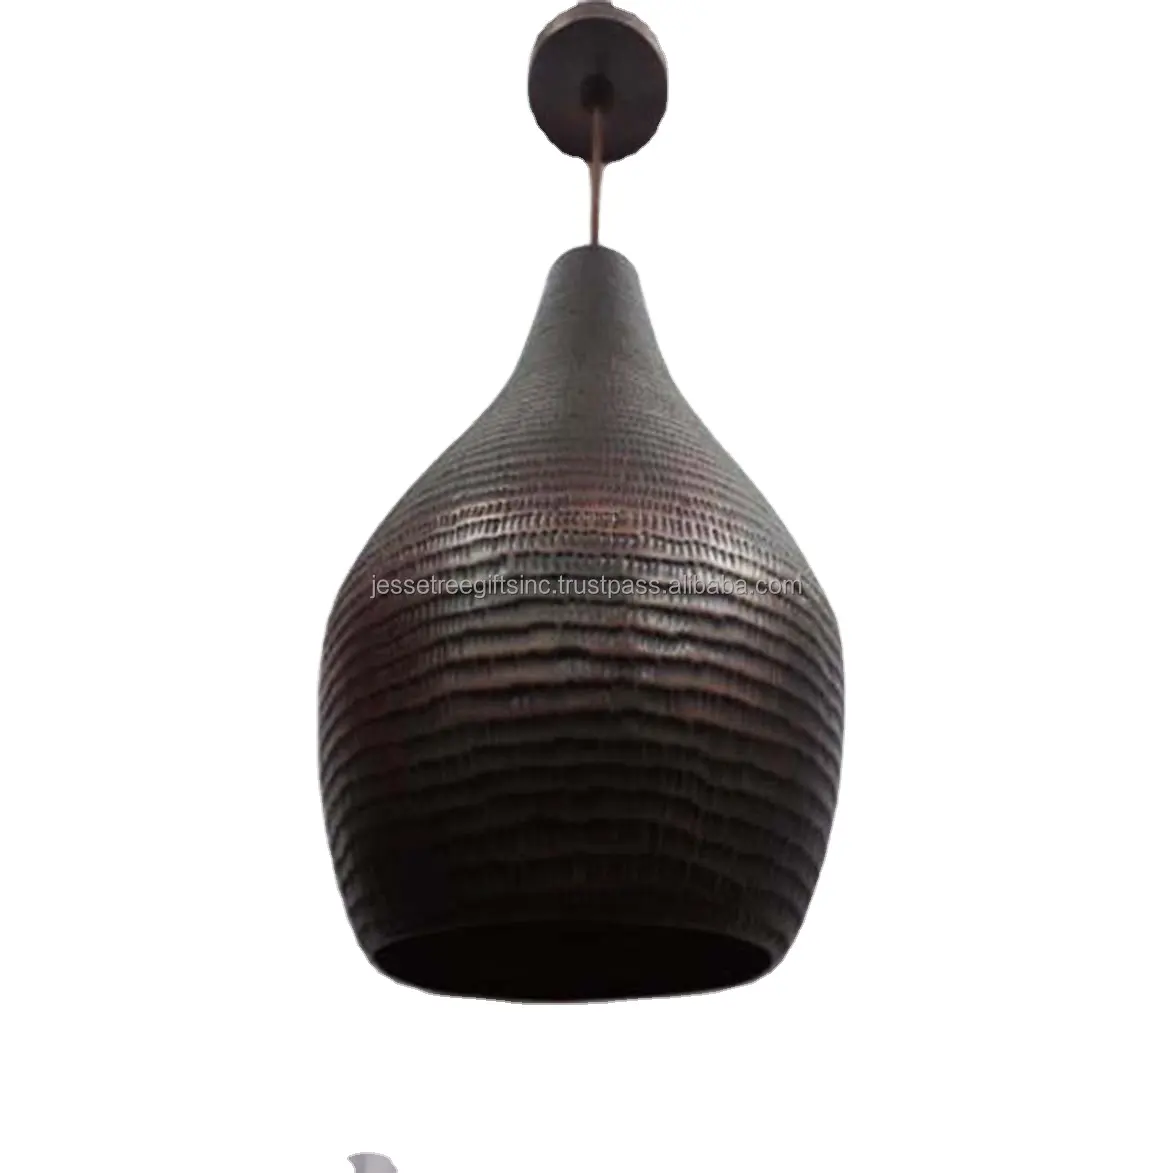 Metal Sheet Brown Spray Paint Finishing Pendant Light With Embossed Design Round Shape Excellent Quality For Home Lighting